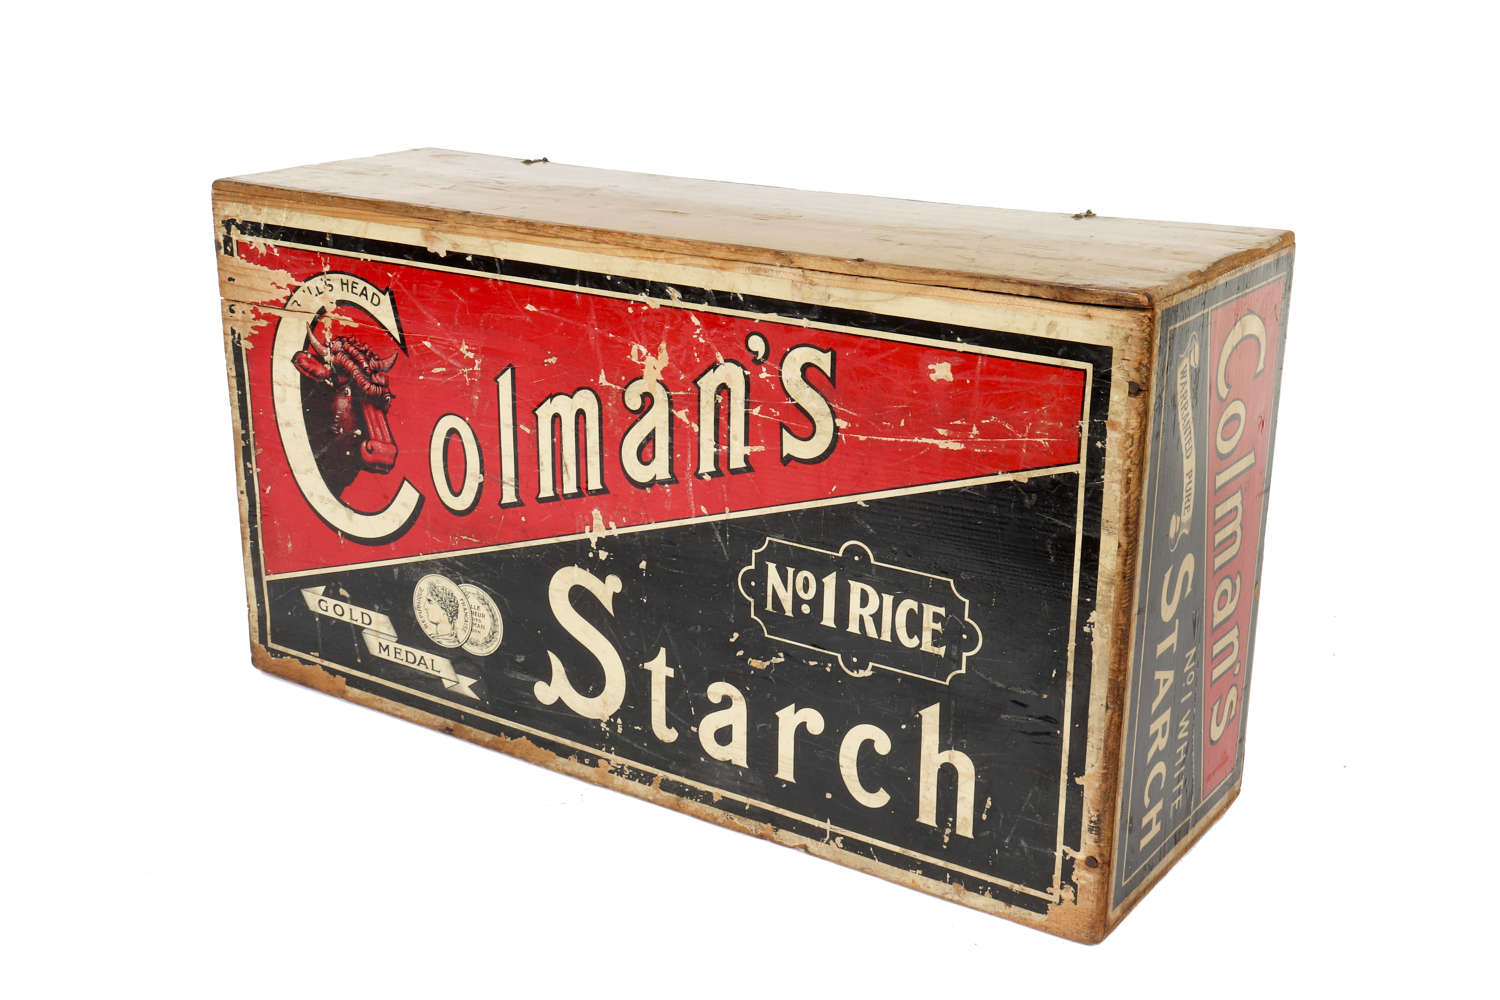 Wooden shop delivery and display box for Colman's Starch